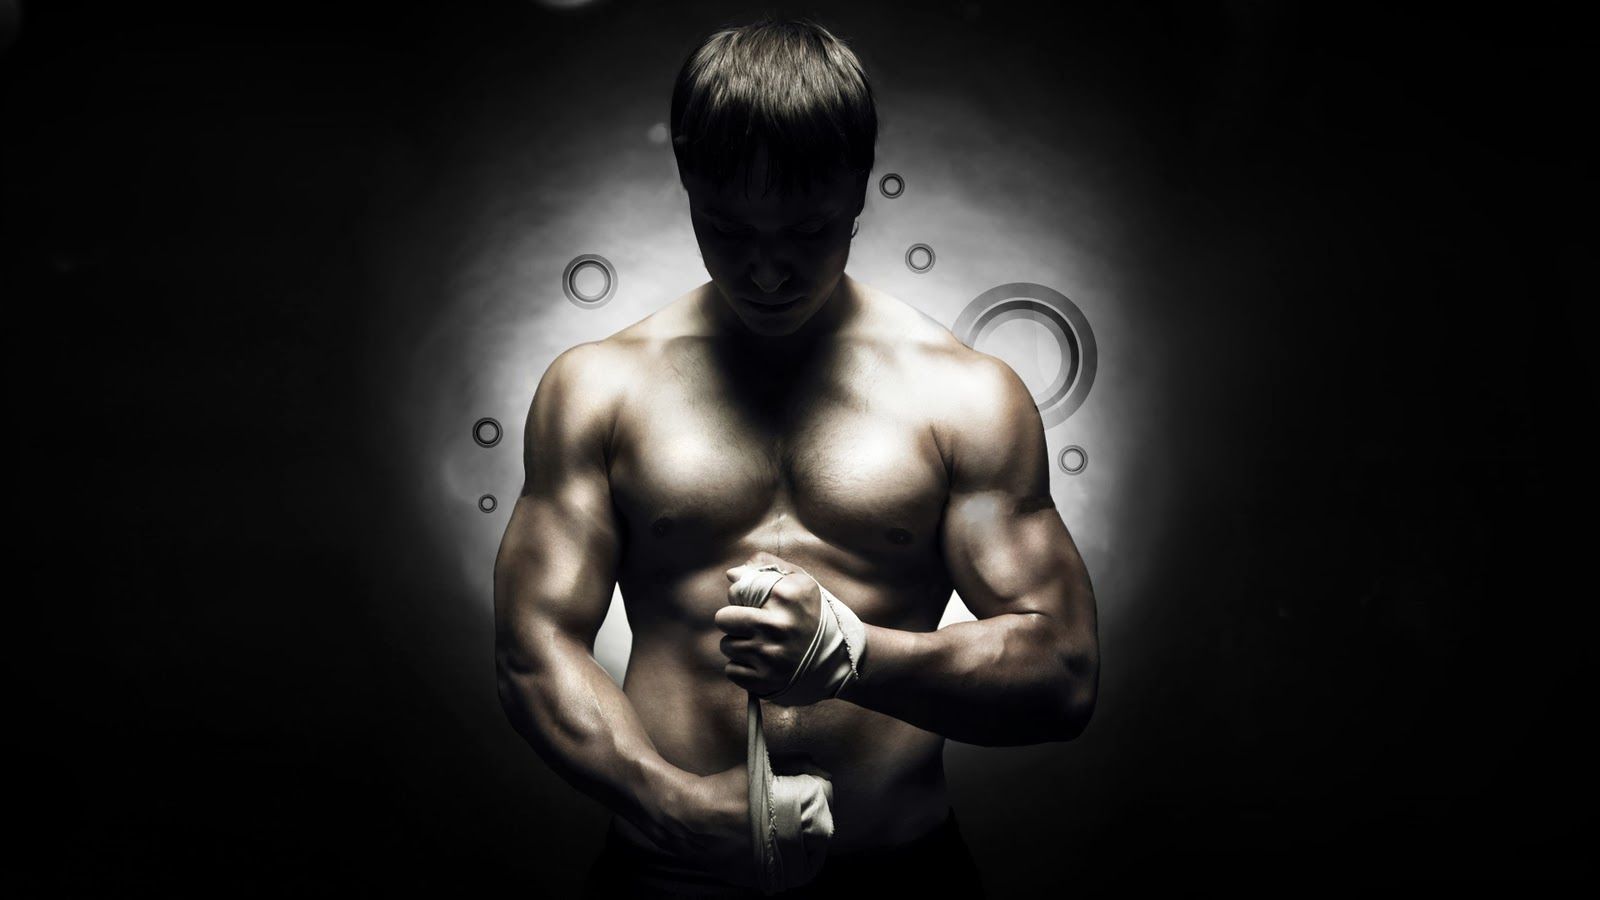 35 Martial Arts Hd Wallpaper Free of charge Download - Design Gab